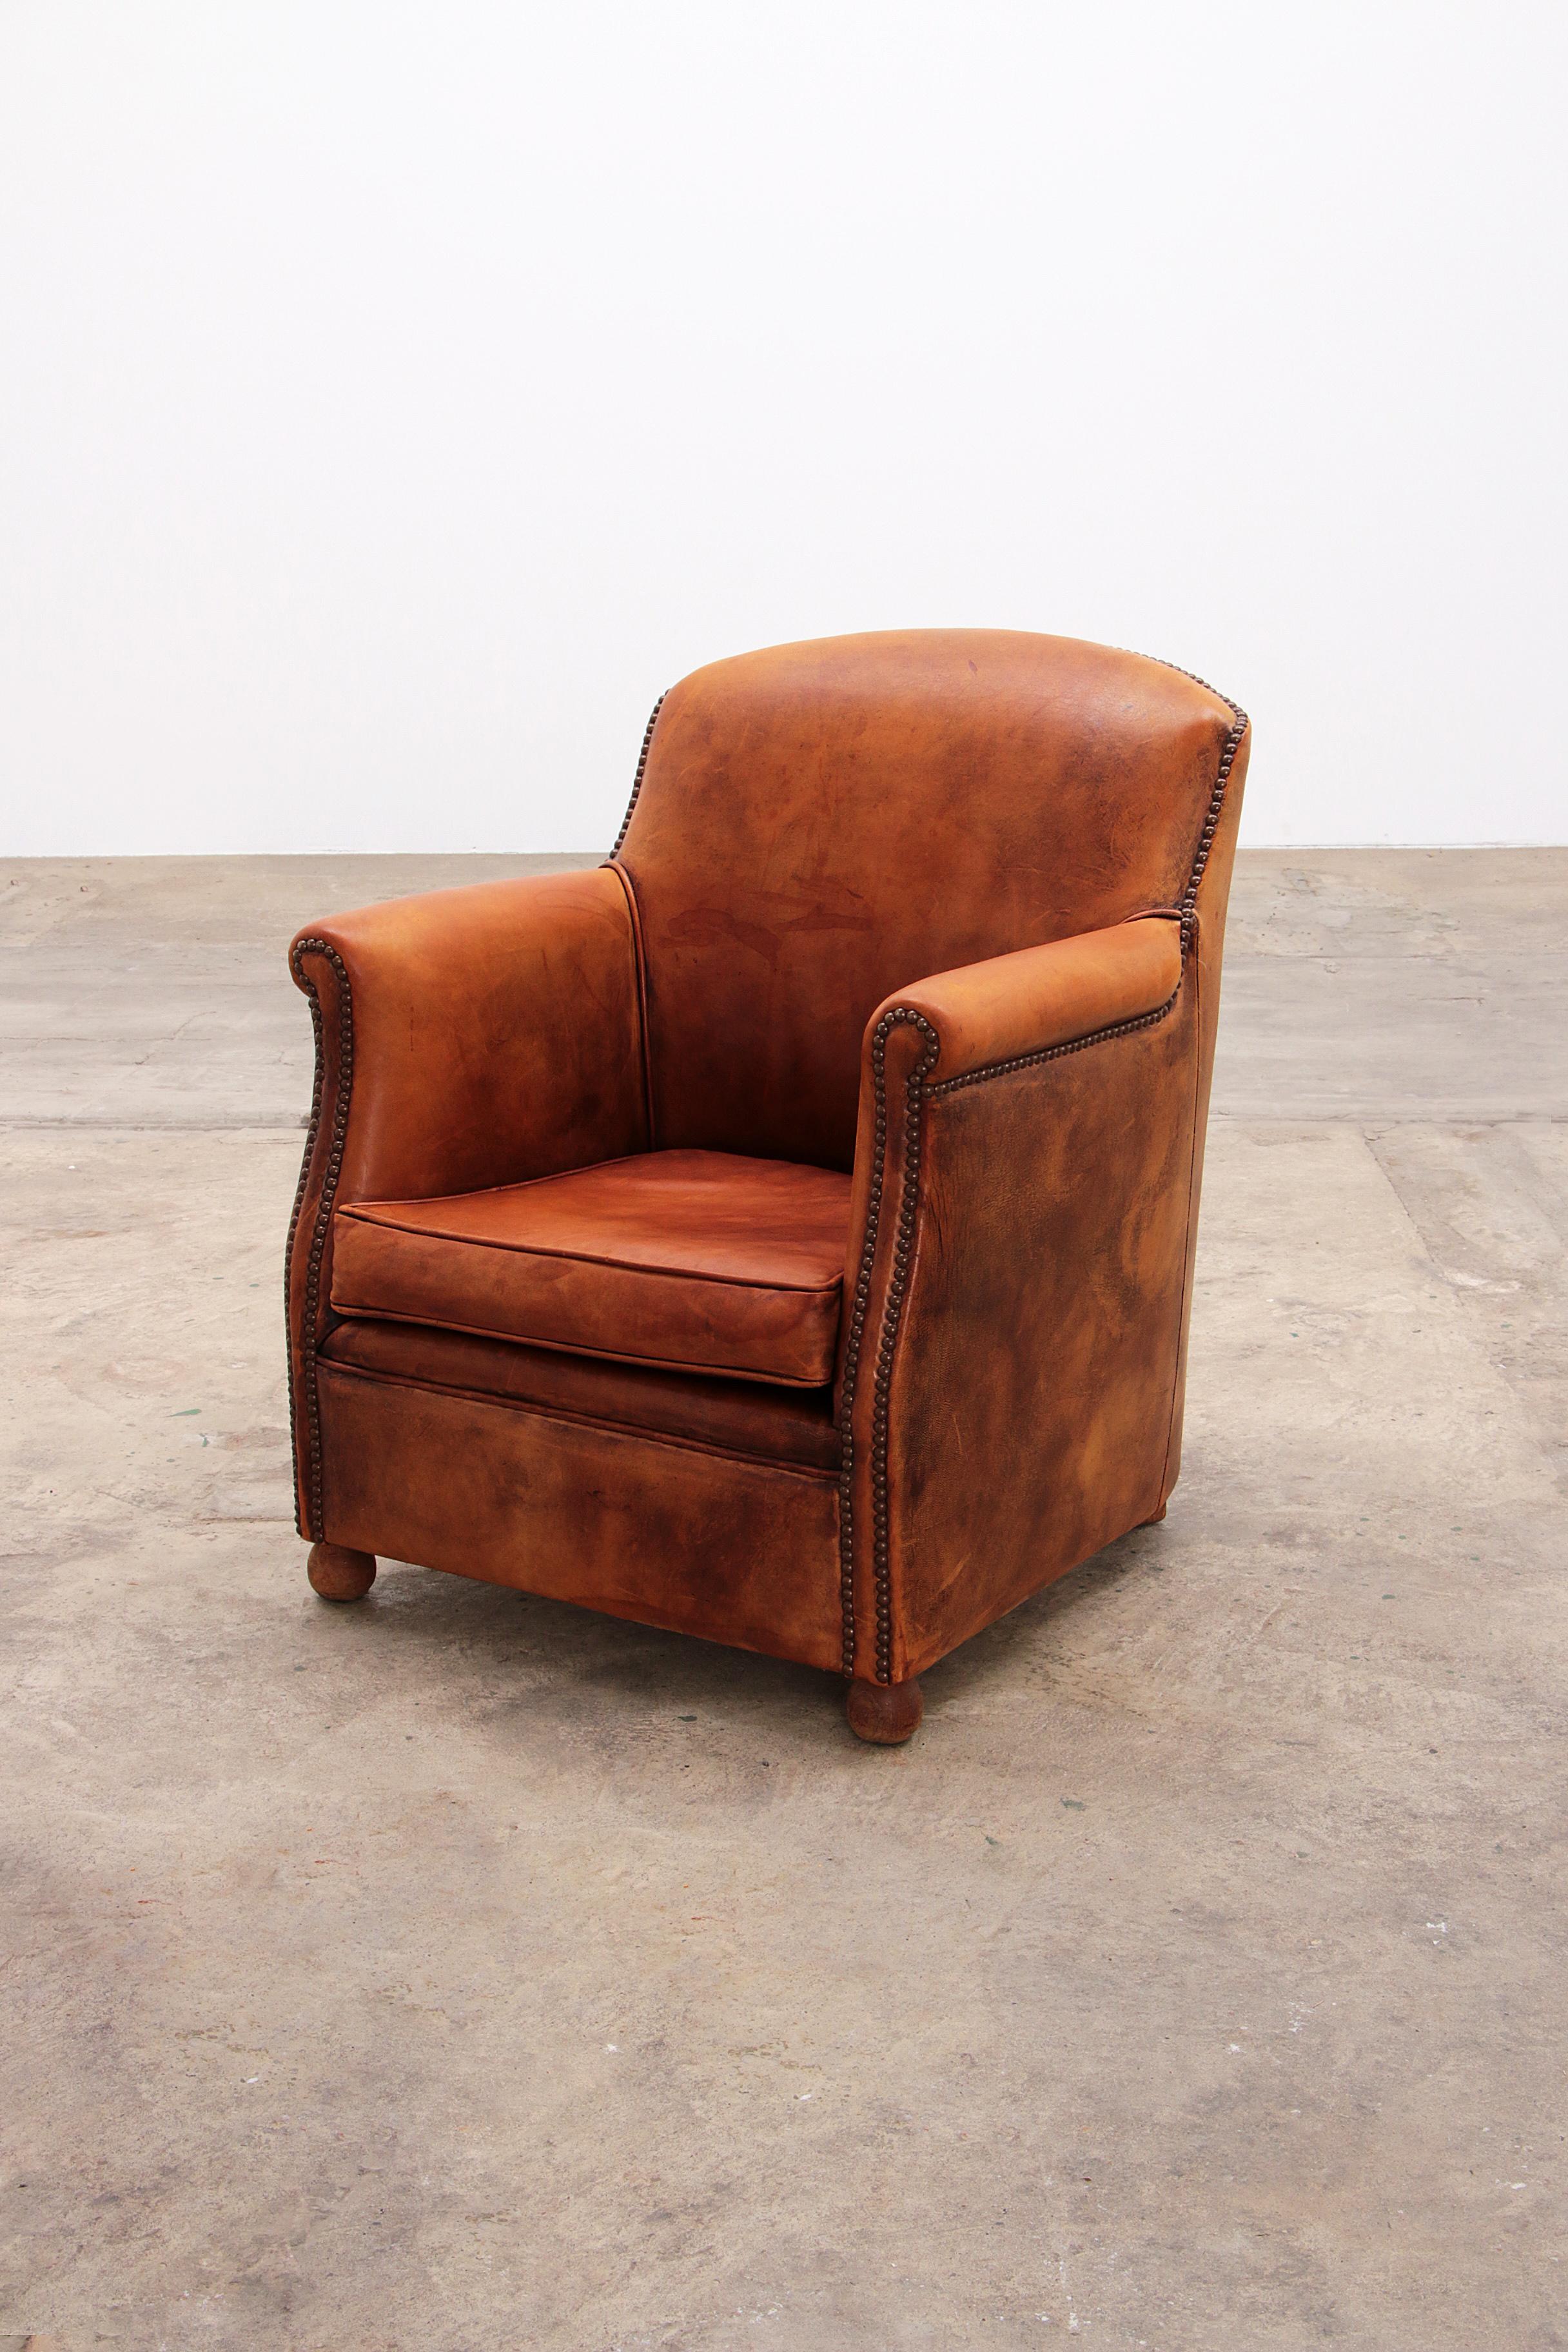 Vintage club armchair made of sheepskin with a beautiful patina, 1970 Netherlands





Beautiful sheepskin armchair from the Netherlands, most likely produced in the 1970s.



The leather is of good quality and has retained its beautiful warm, deep